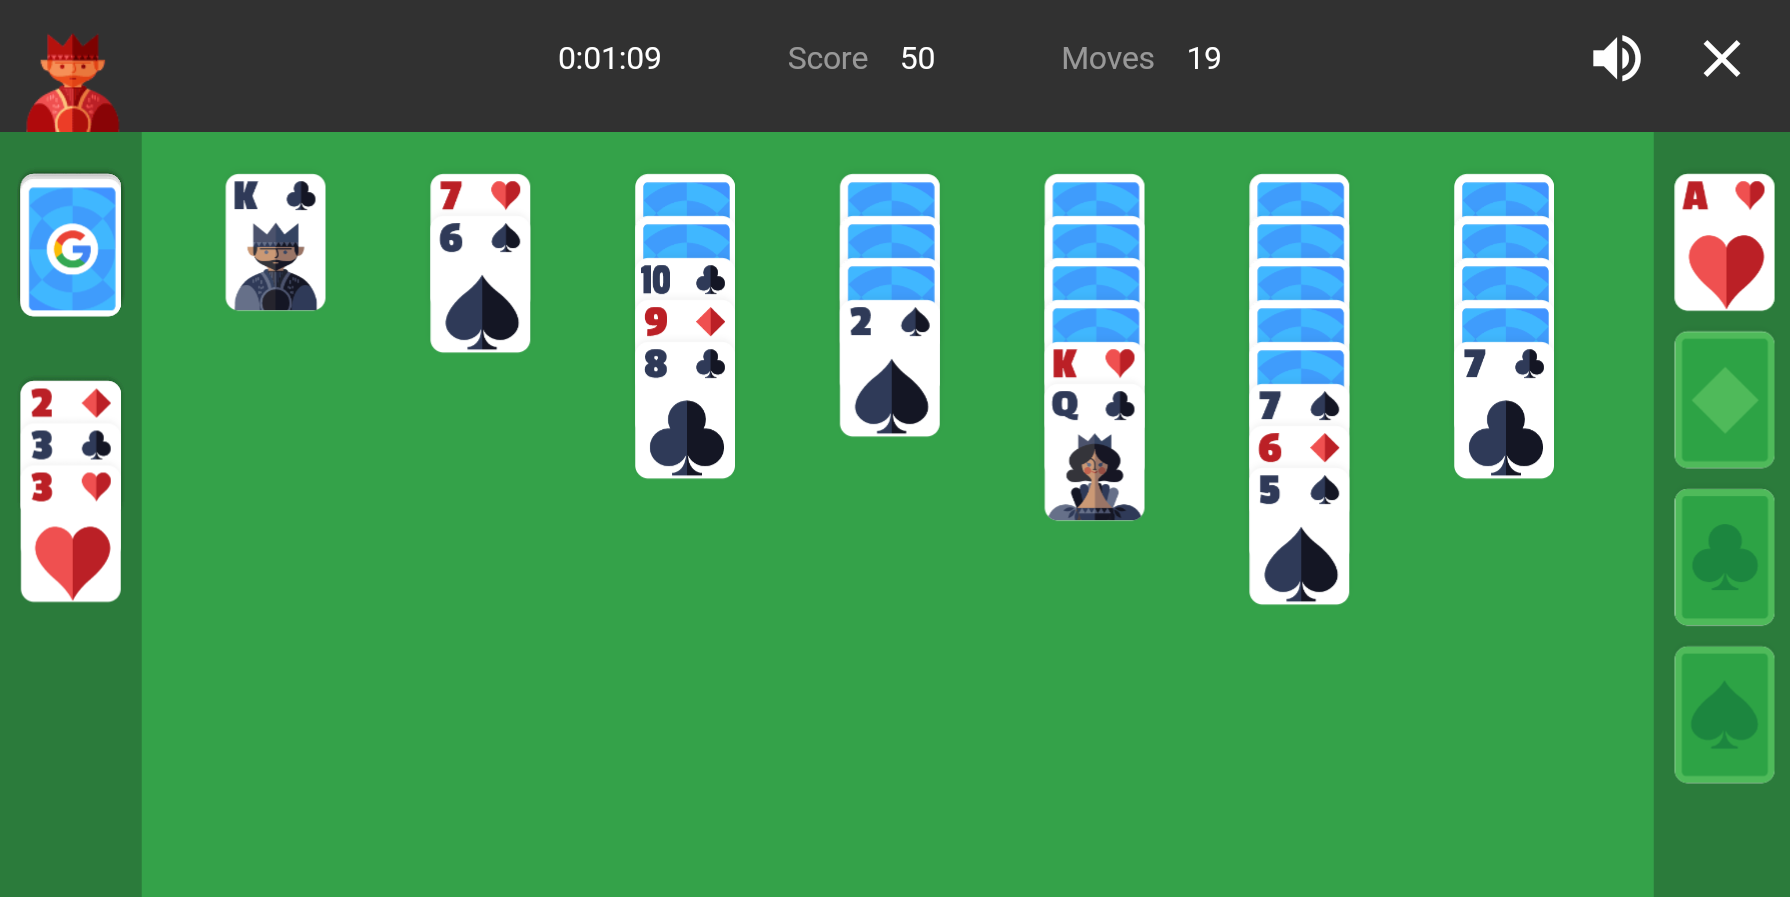 Google Now Lets You Play Solitaire and Tic Tac Toe in Search